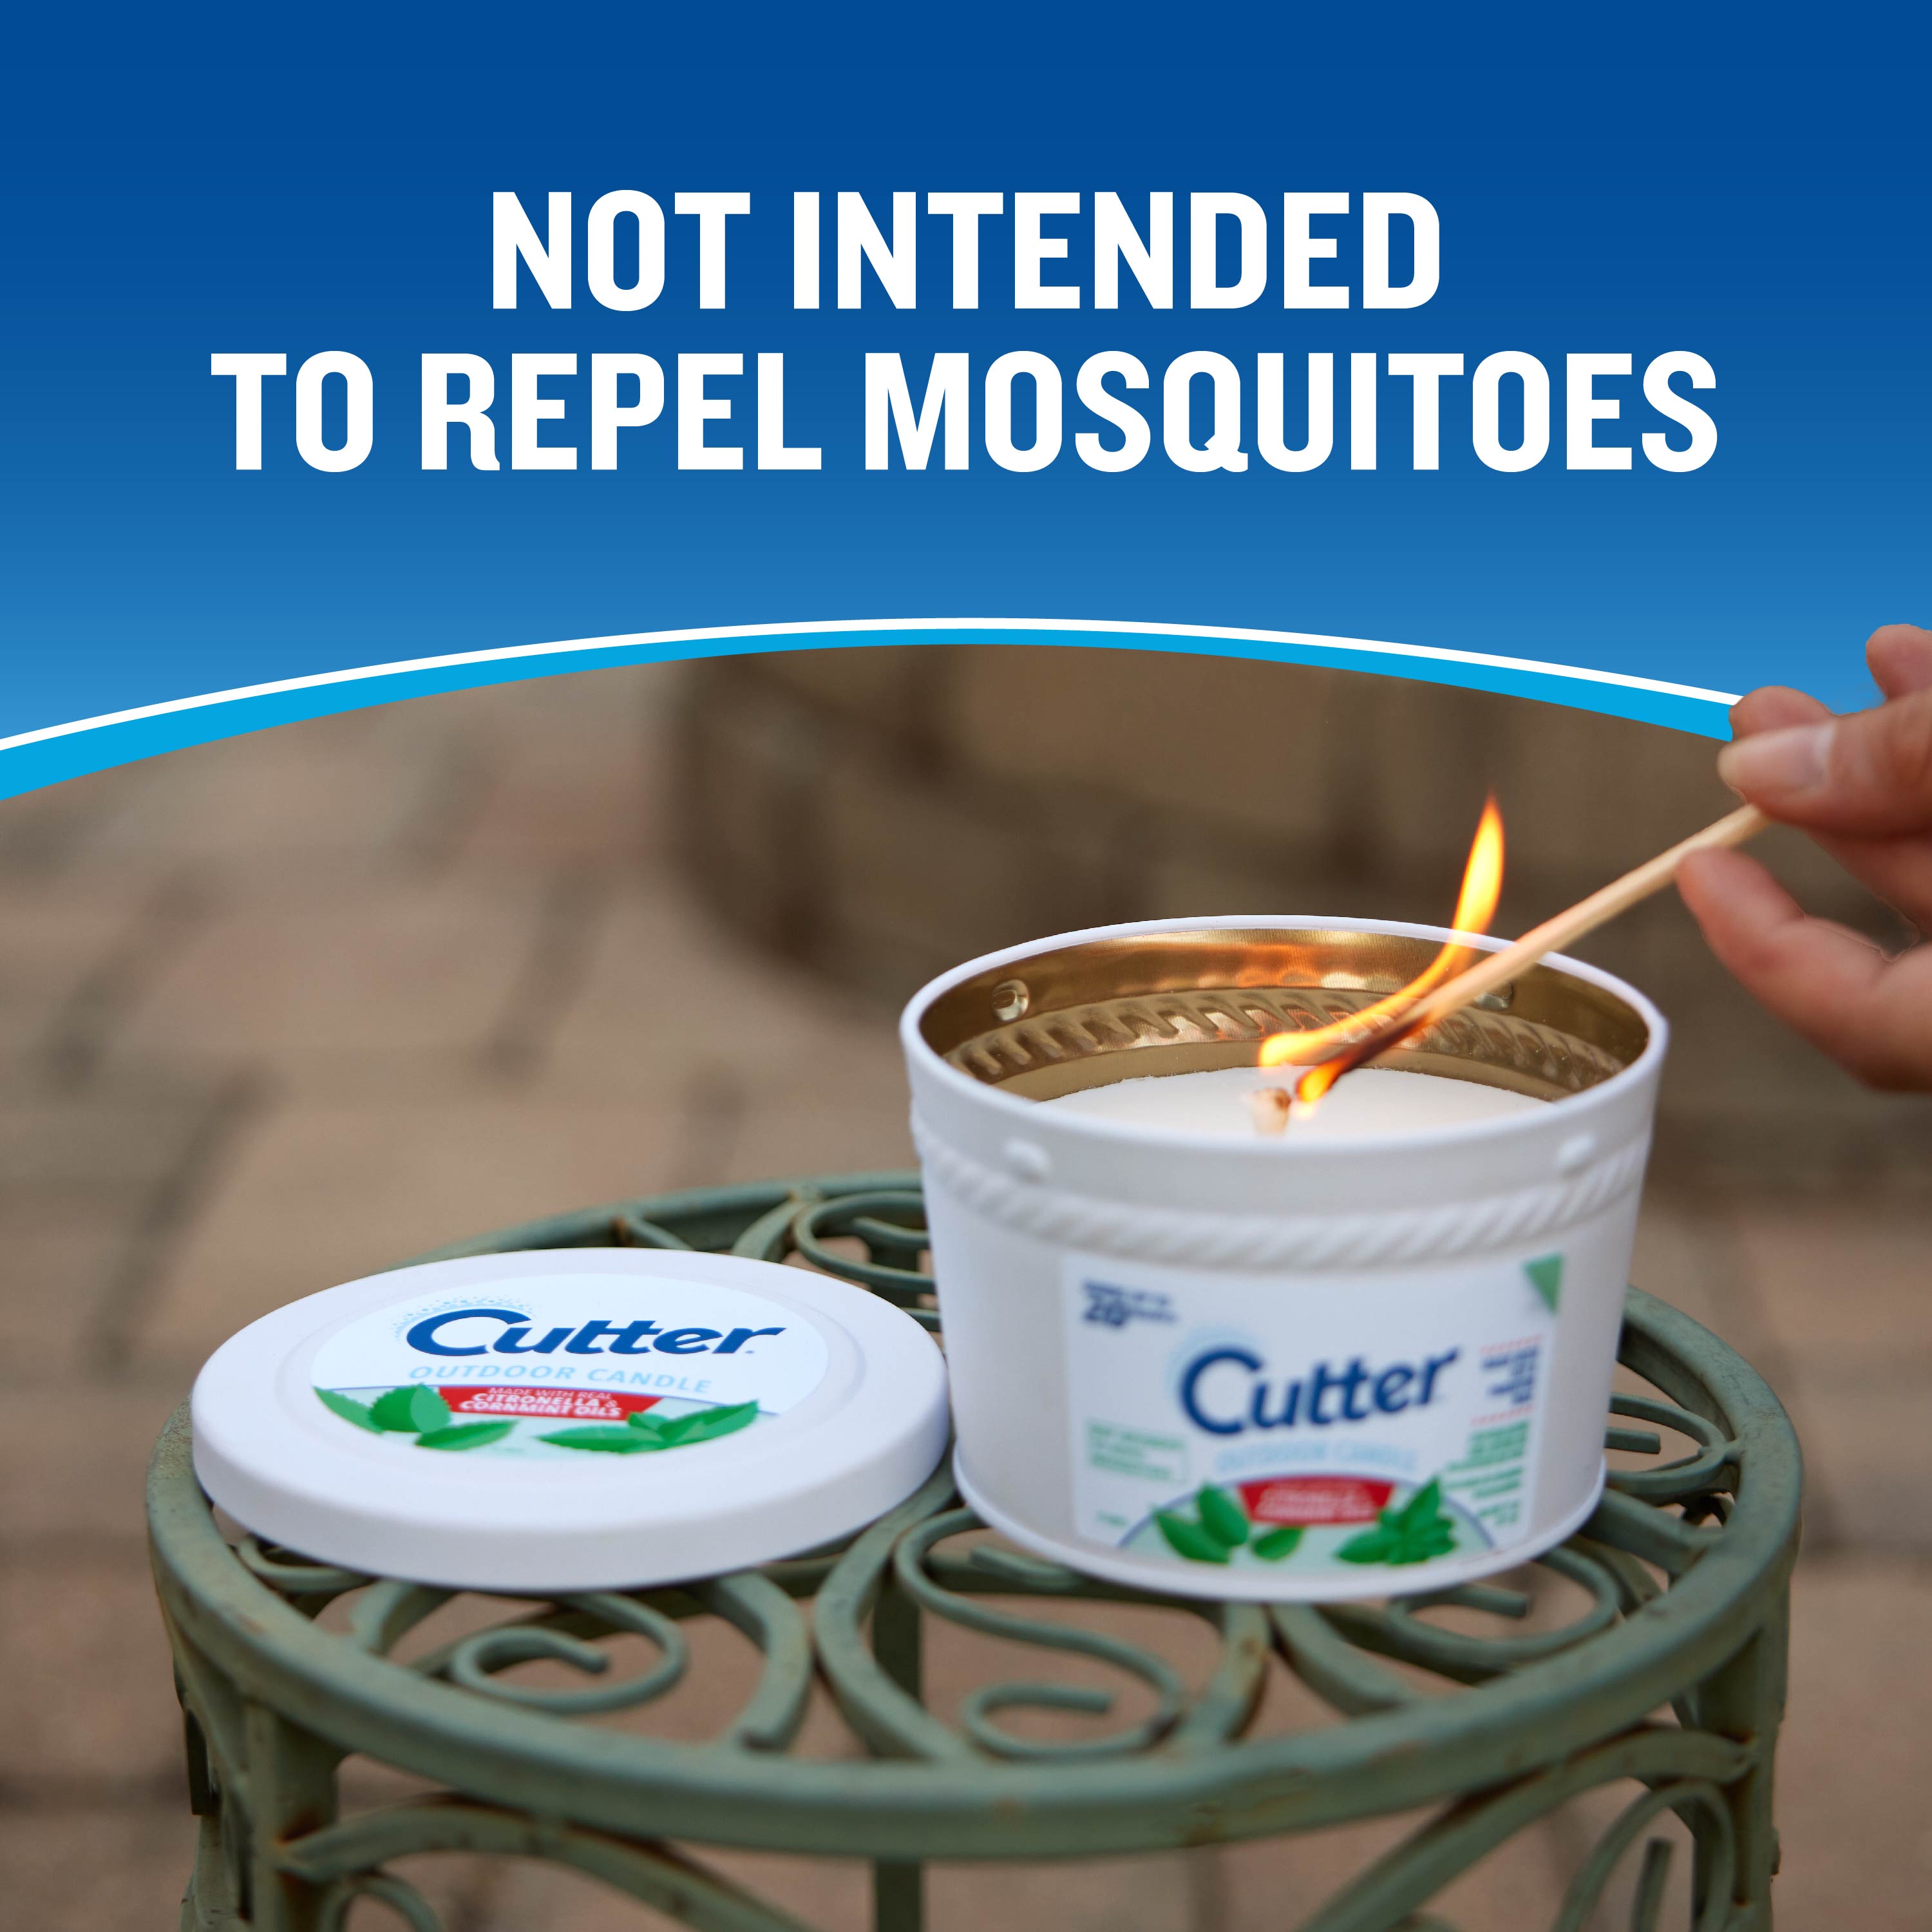 HG-97190 Outdoor Candle, 11 oz - Not Intended to Repel Mosquitoes